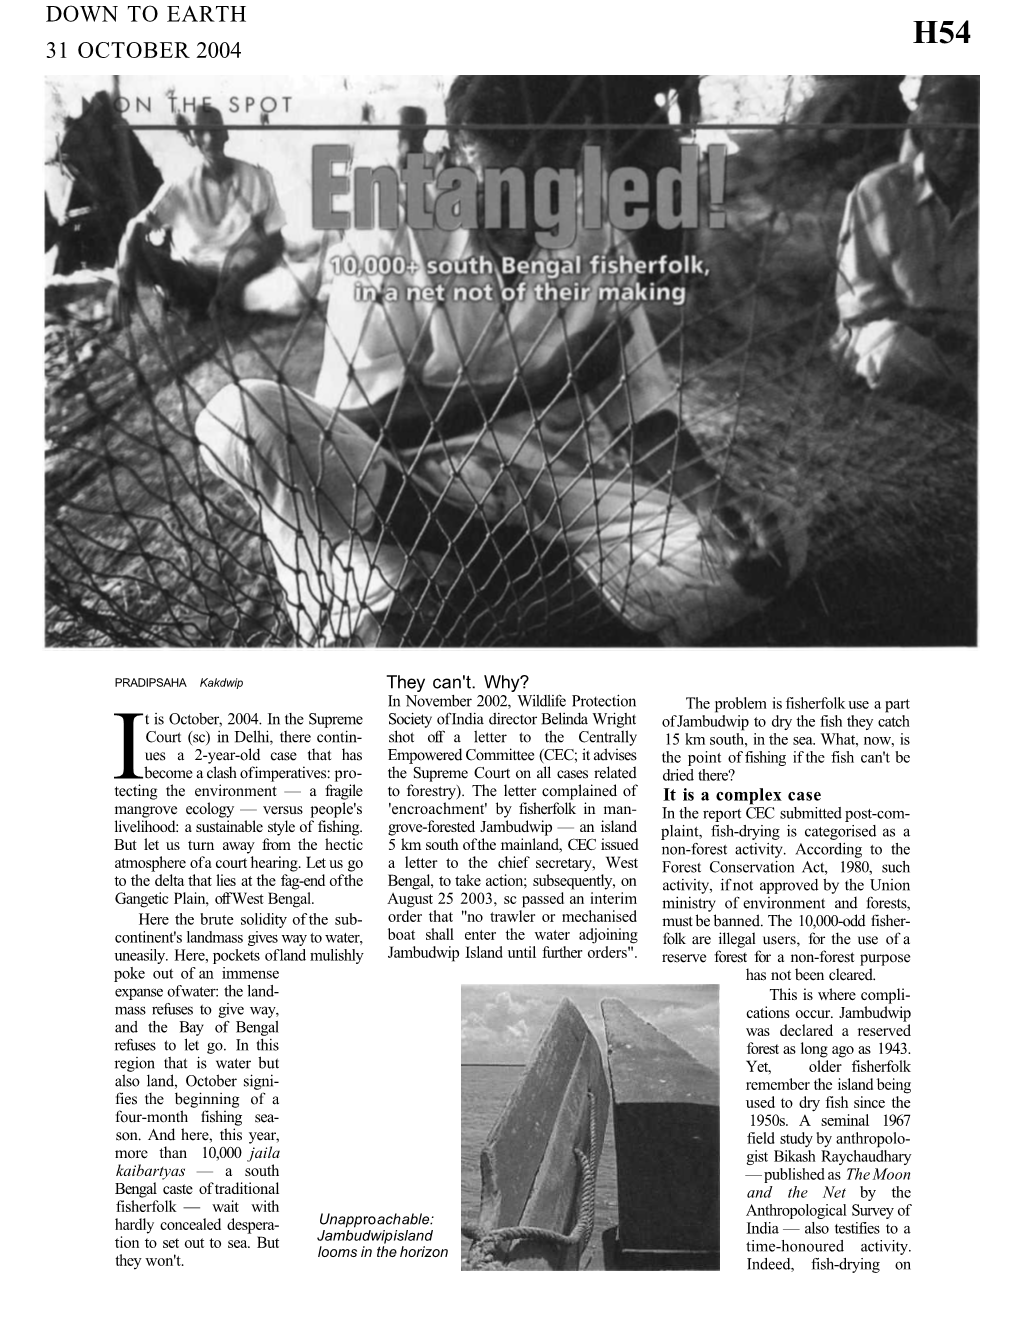 Down to Earth 31 October 2004